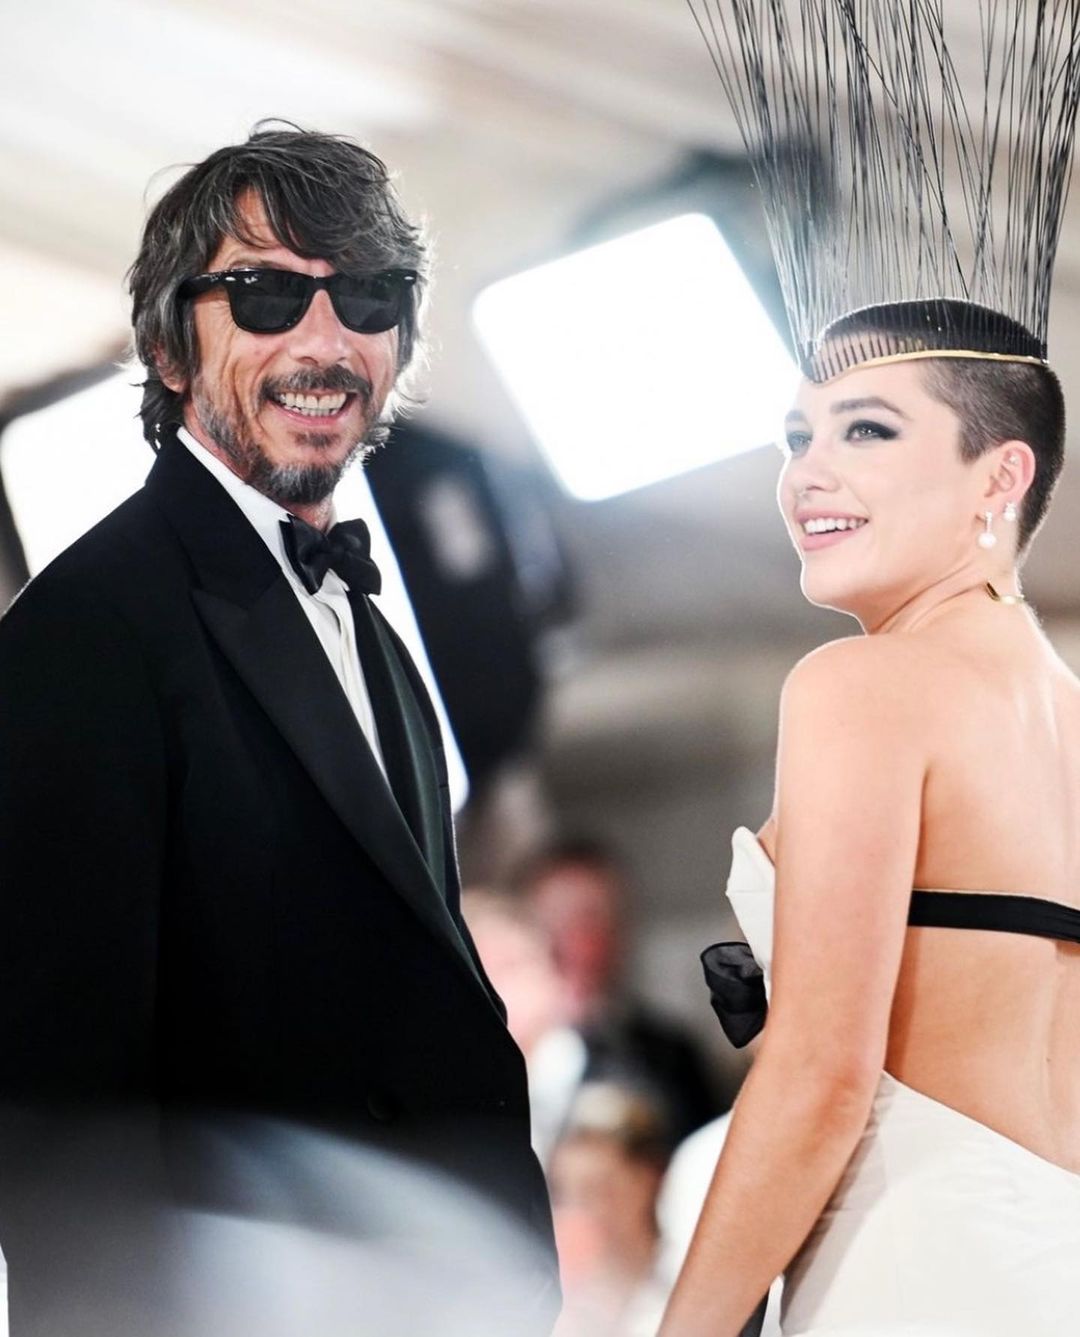 British actress Florence Pugh and artistic director of Valentino, Pierpaolo Piccioli, at the Met Gala 2023. Reproduction/Instagram